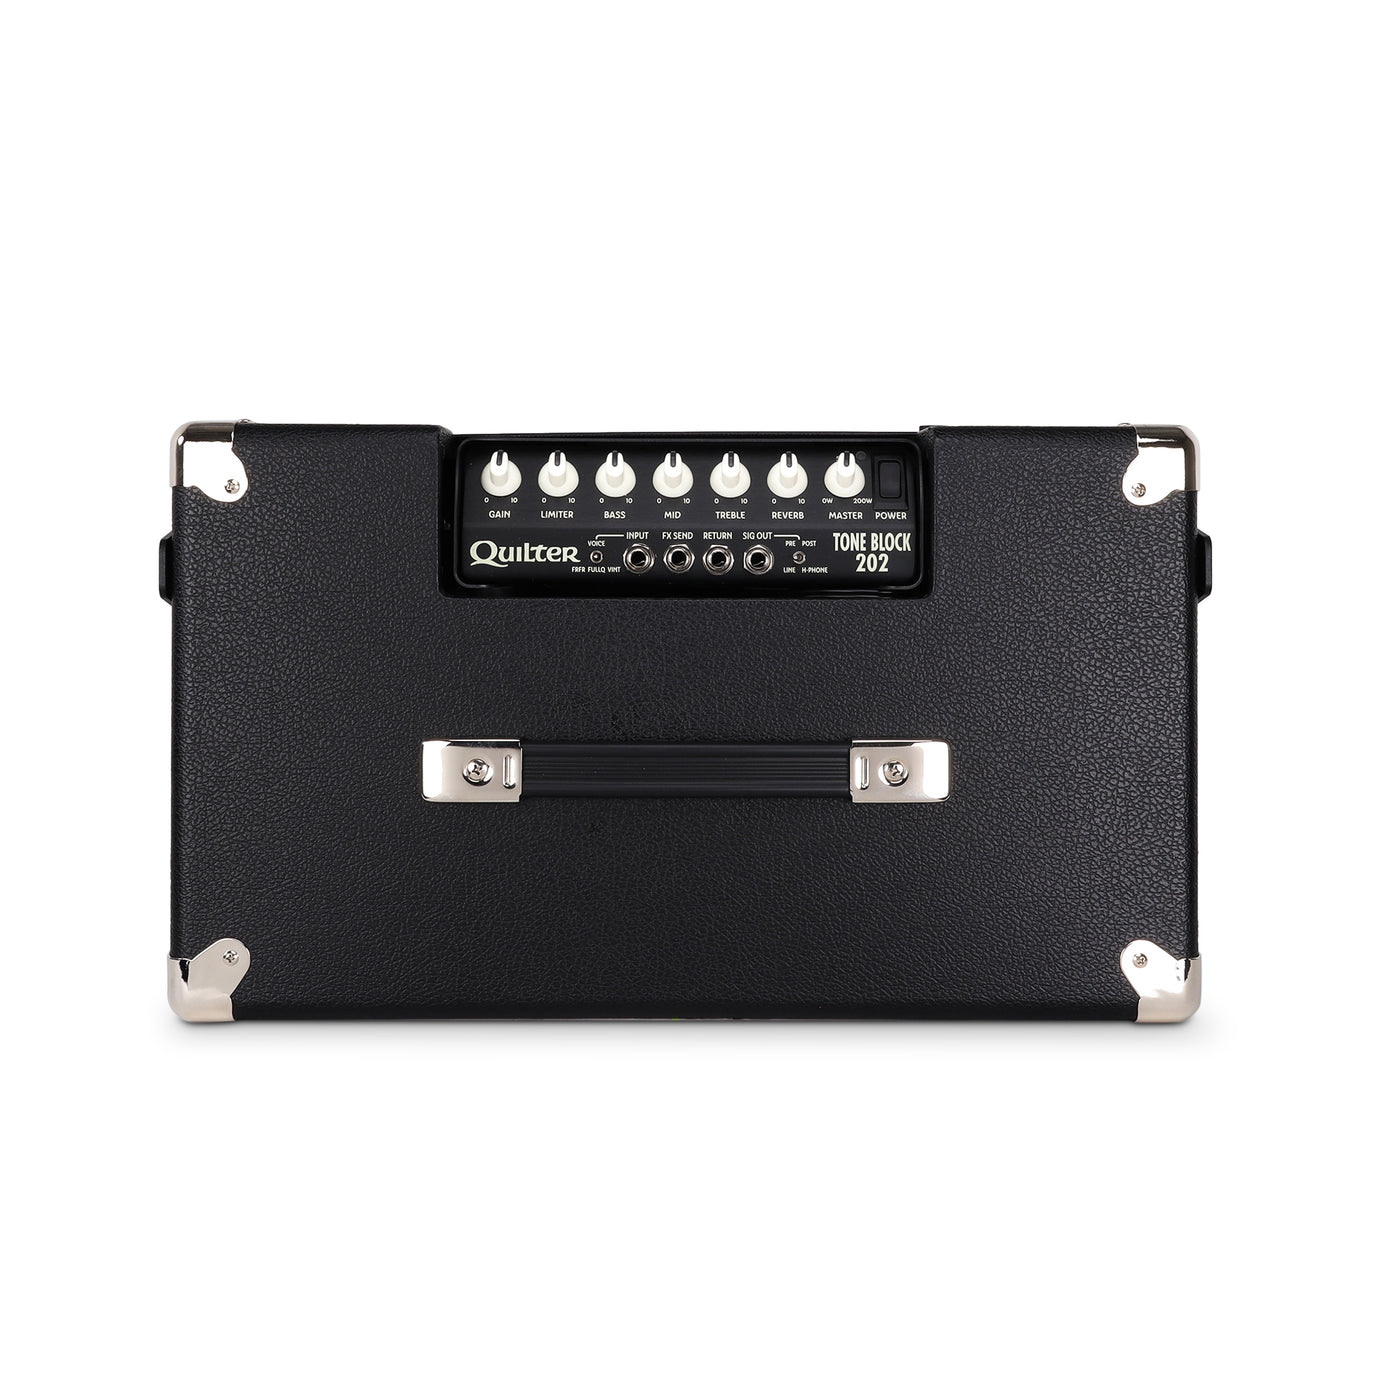 GIno Matteo amplifier shown from the top